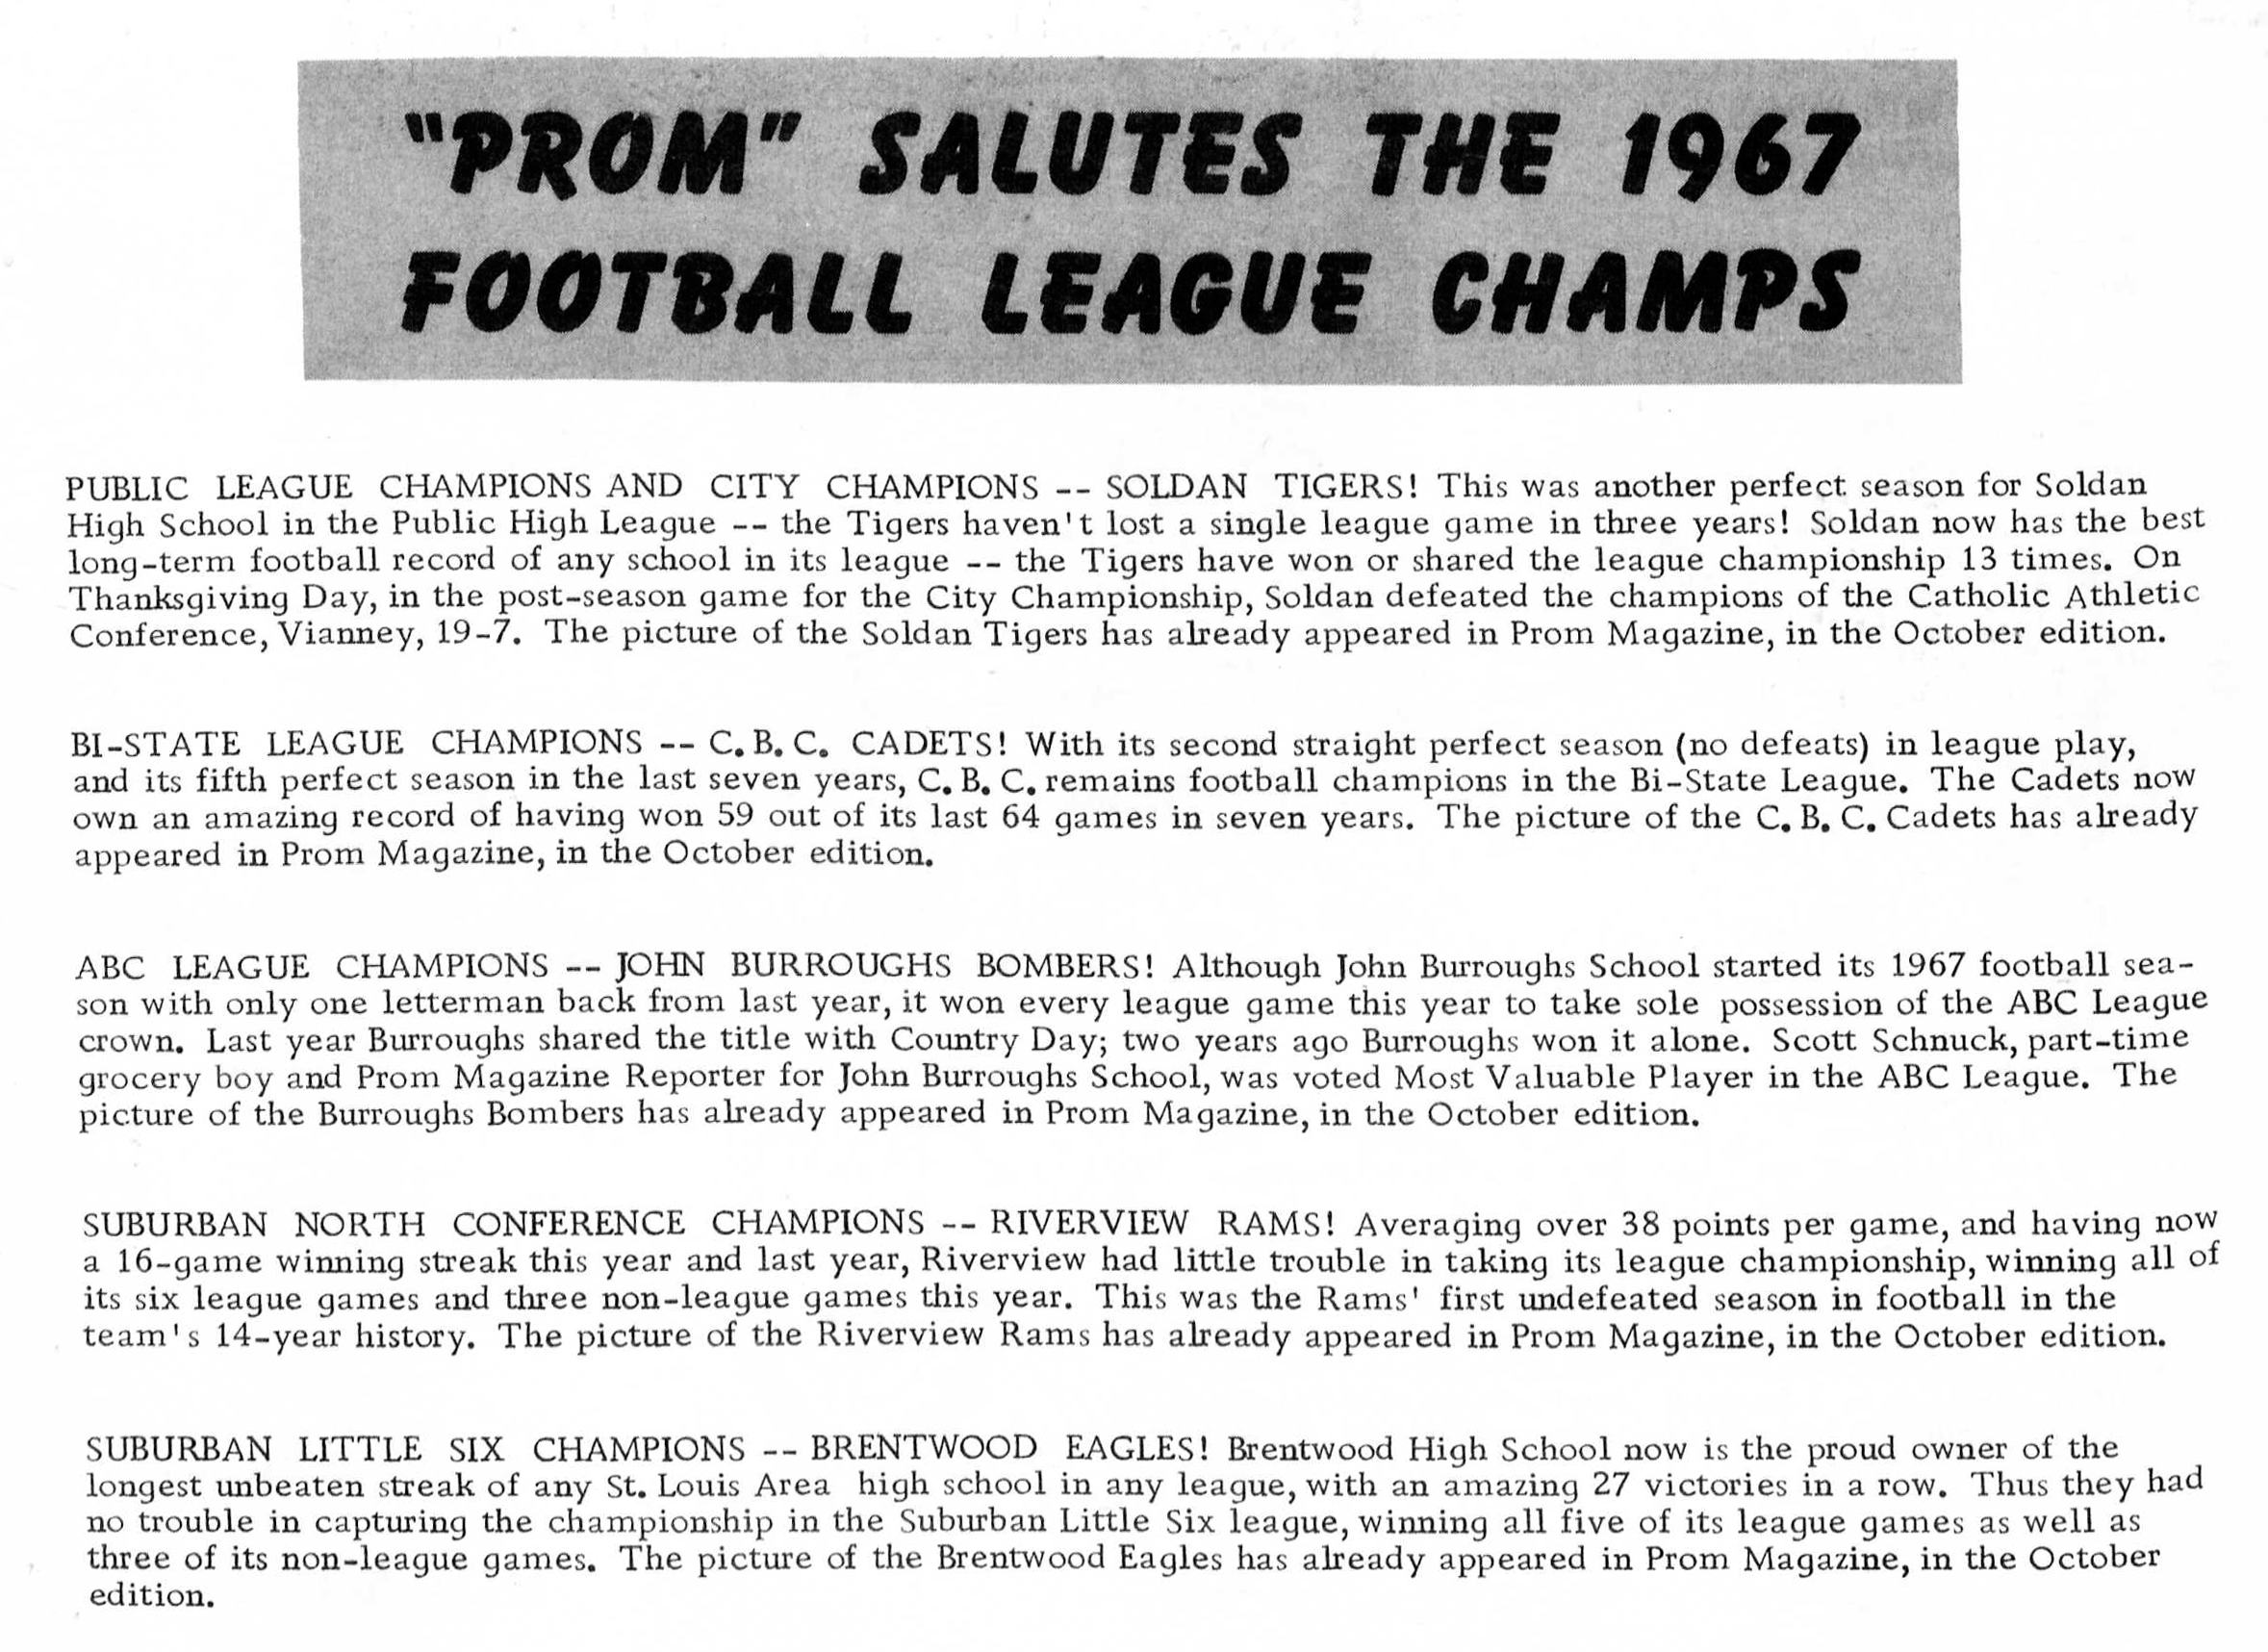 RIVERVIEW RAMS--SUBURBAN NORTH CONFERENCE CHAMPIONS--UNDEFEATED!! PROM MAGAZINE NOVEMBER 1967